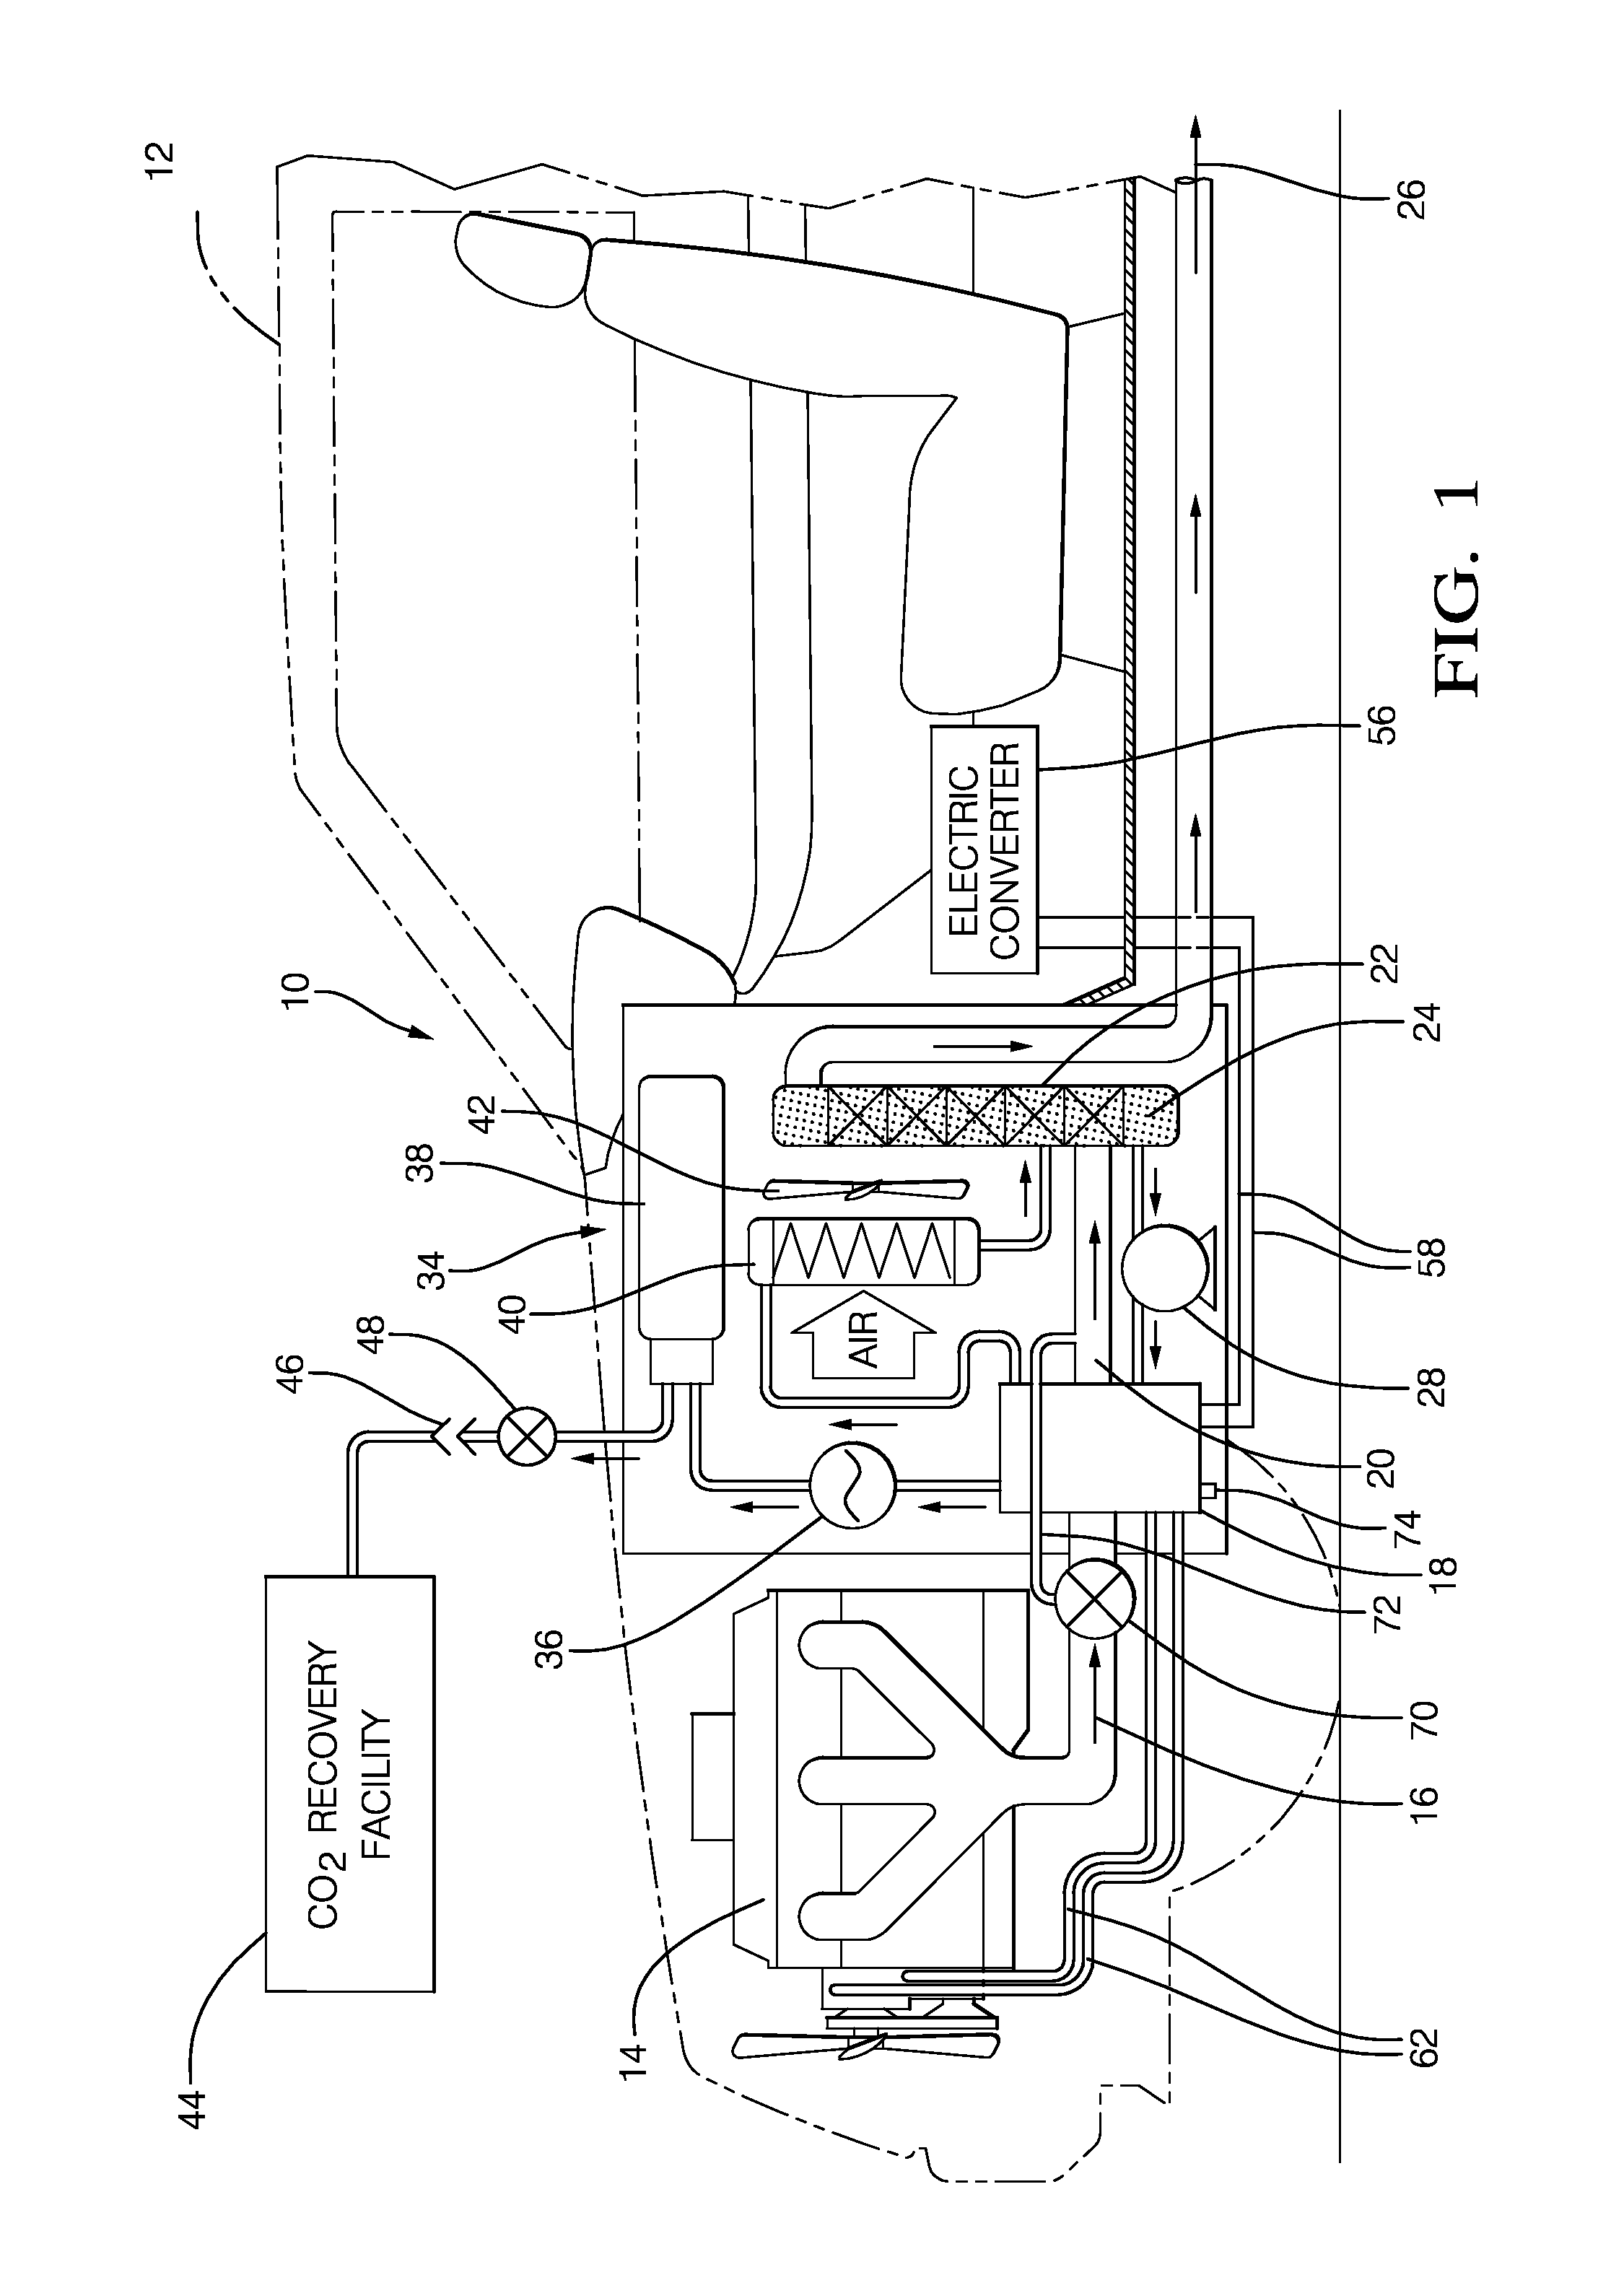 Carbon dioxide absorbent fluid for a carbon dioxide sequestering system on a vehicle